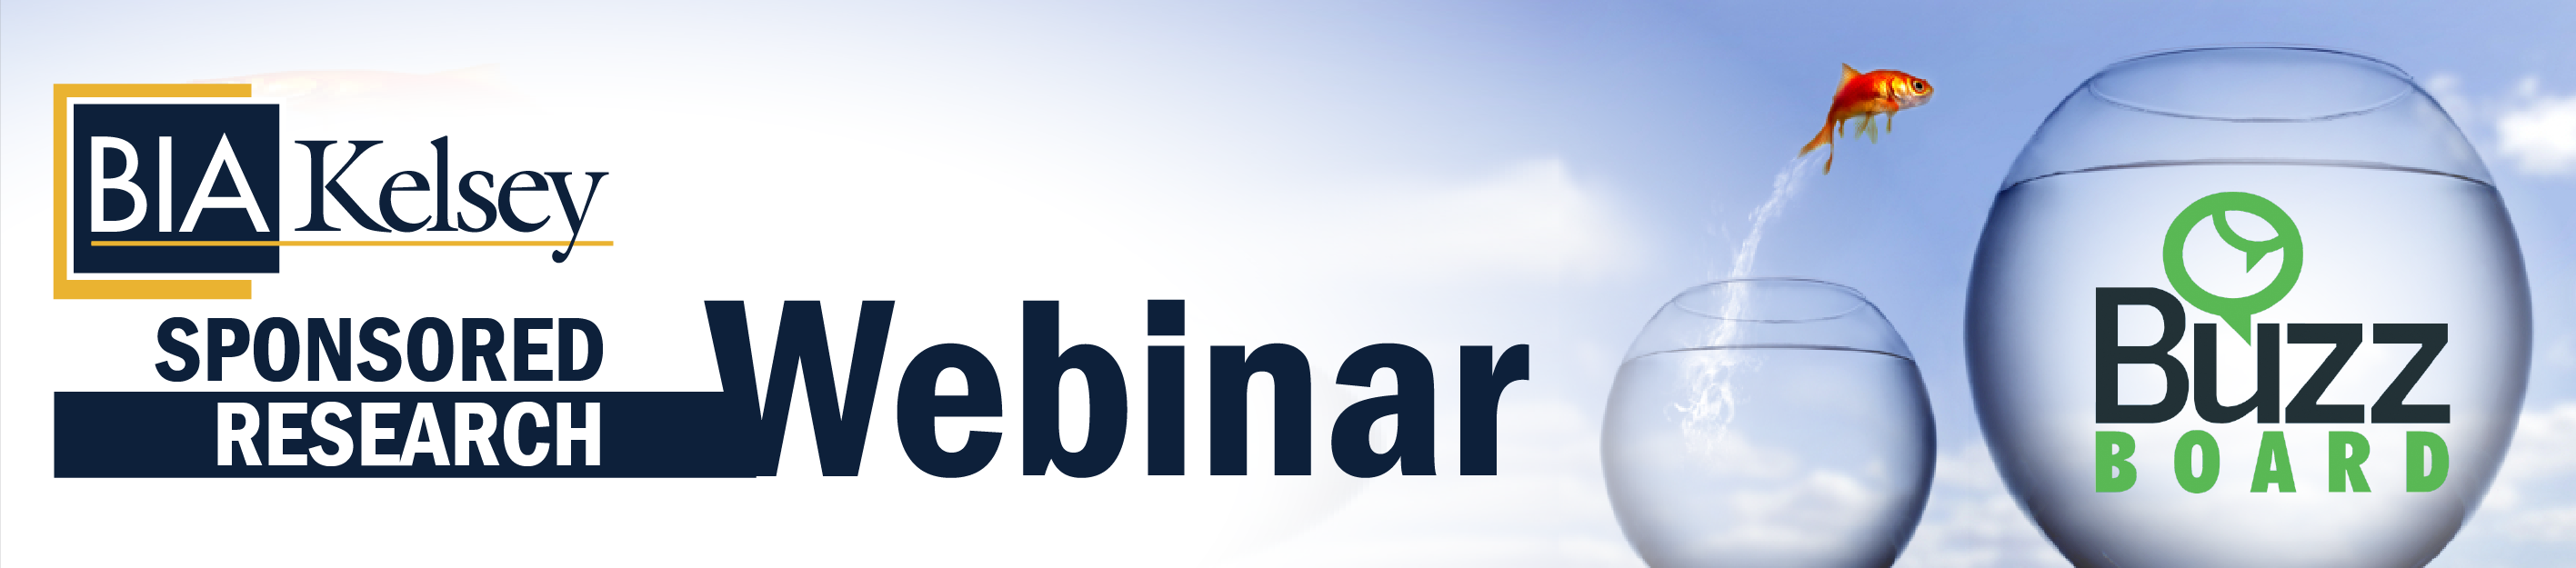 Upcoming Webinar: What They Don’t Tell You About Sales Transformation